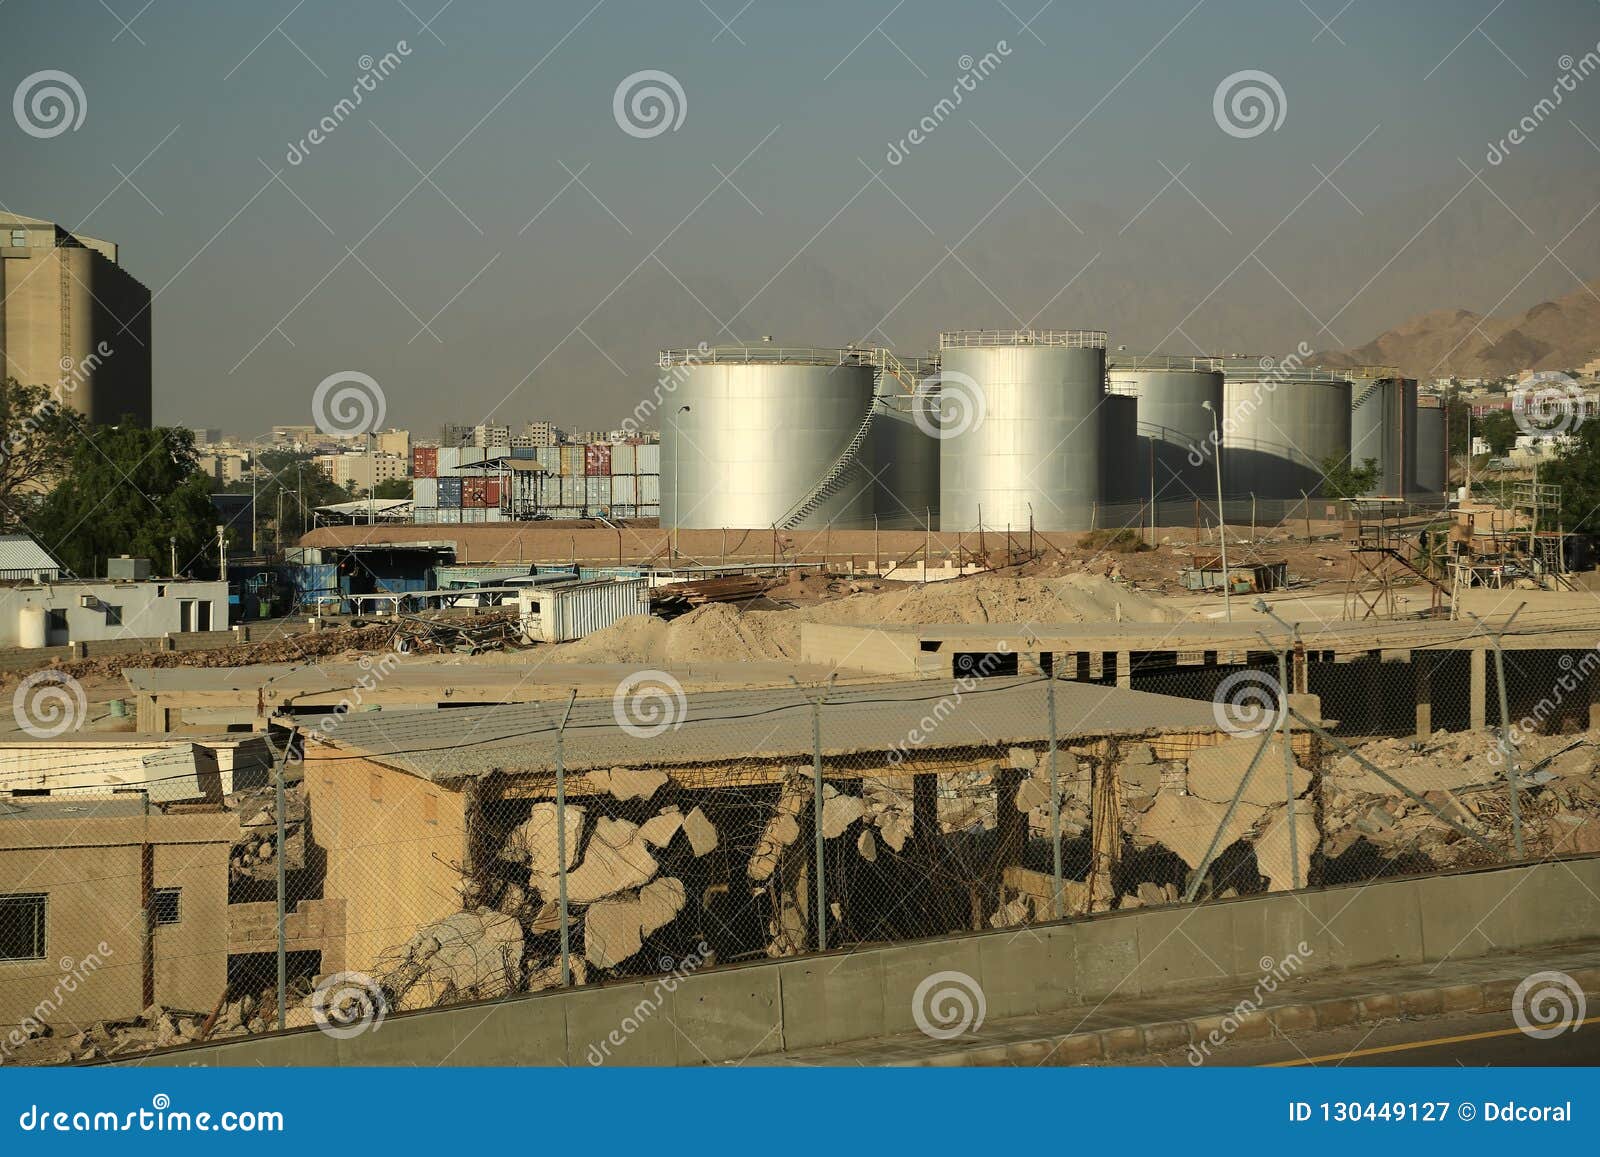 Large Capacity Tanks In Industrial Area In Aqaba City Jordan Editorial Photography Image Of Repository Equipment